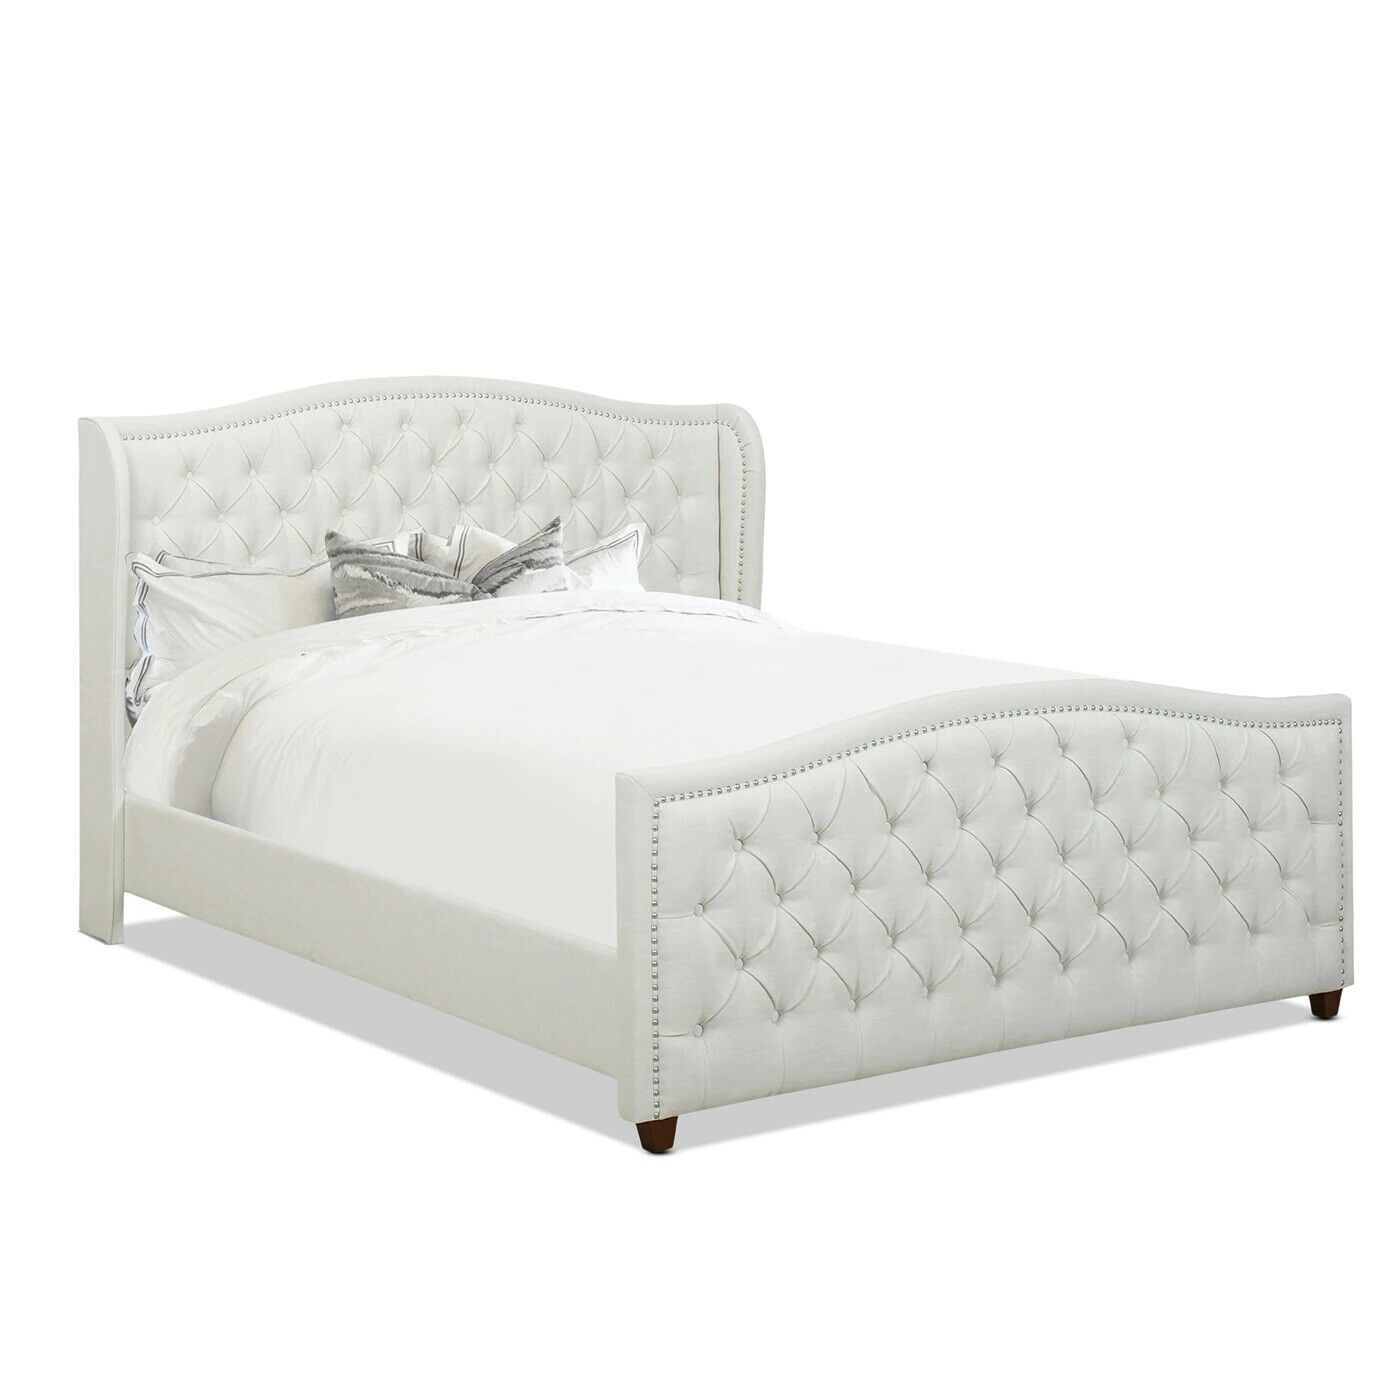 Primary image for Jennifer Taylor Gracewood Hollow Follett Tufted Wingback Upholstered Bed QUEEN